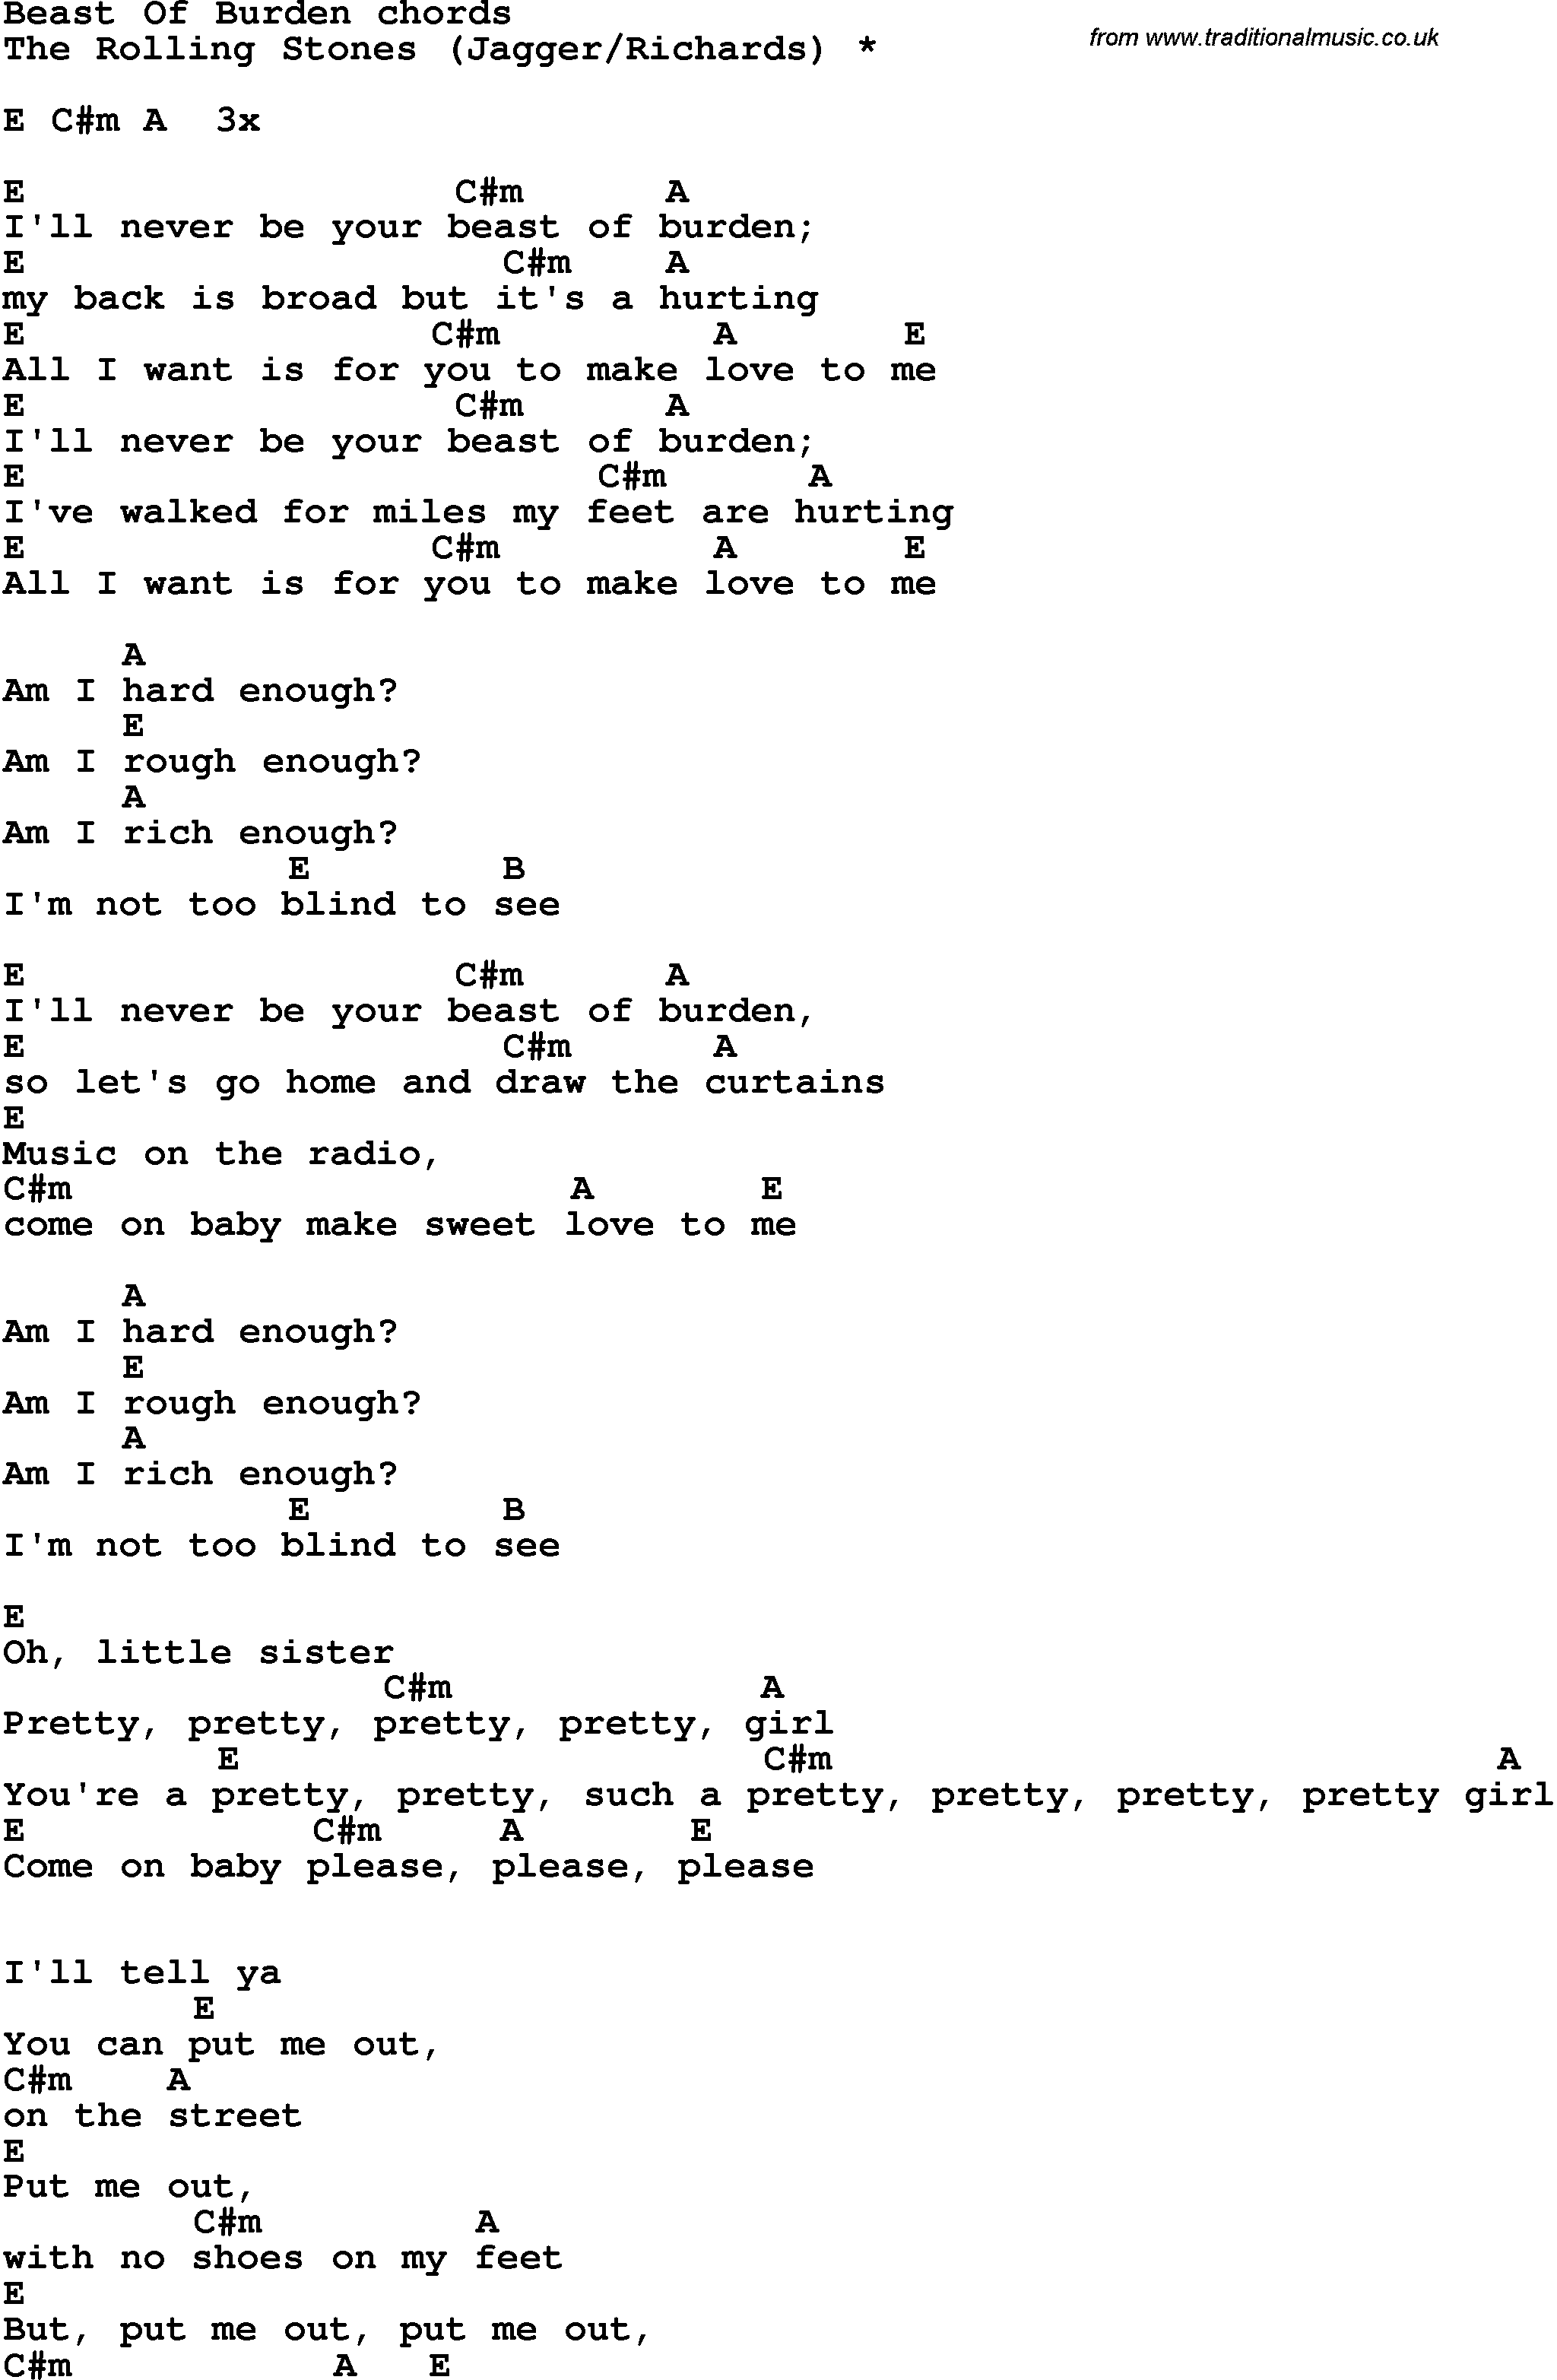 Song Lyrics with guitar chords for Beast Of Burden